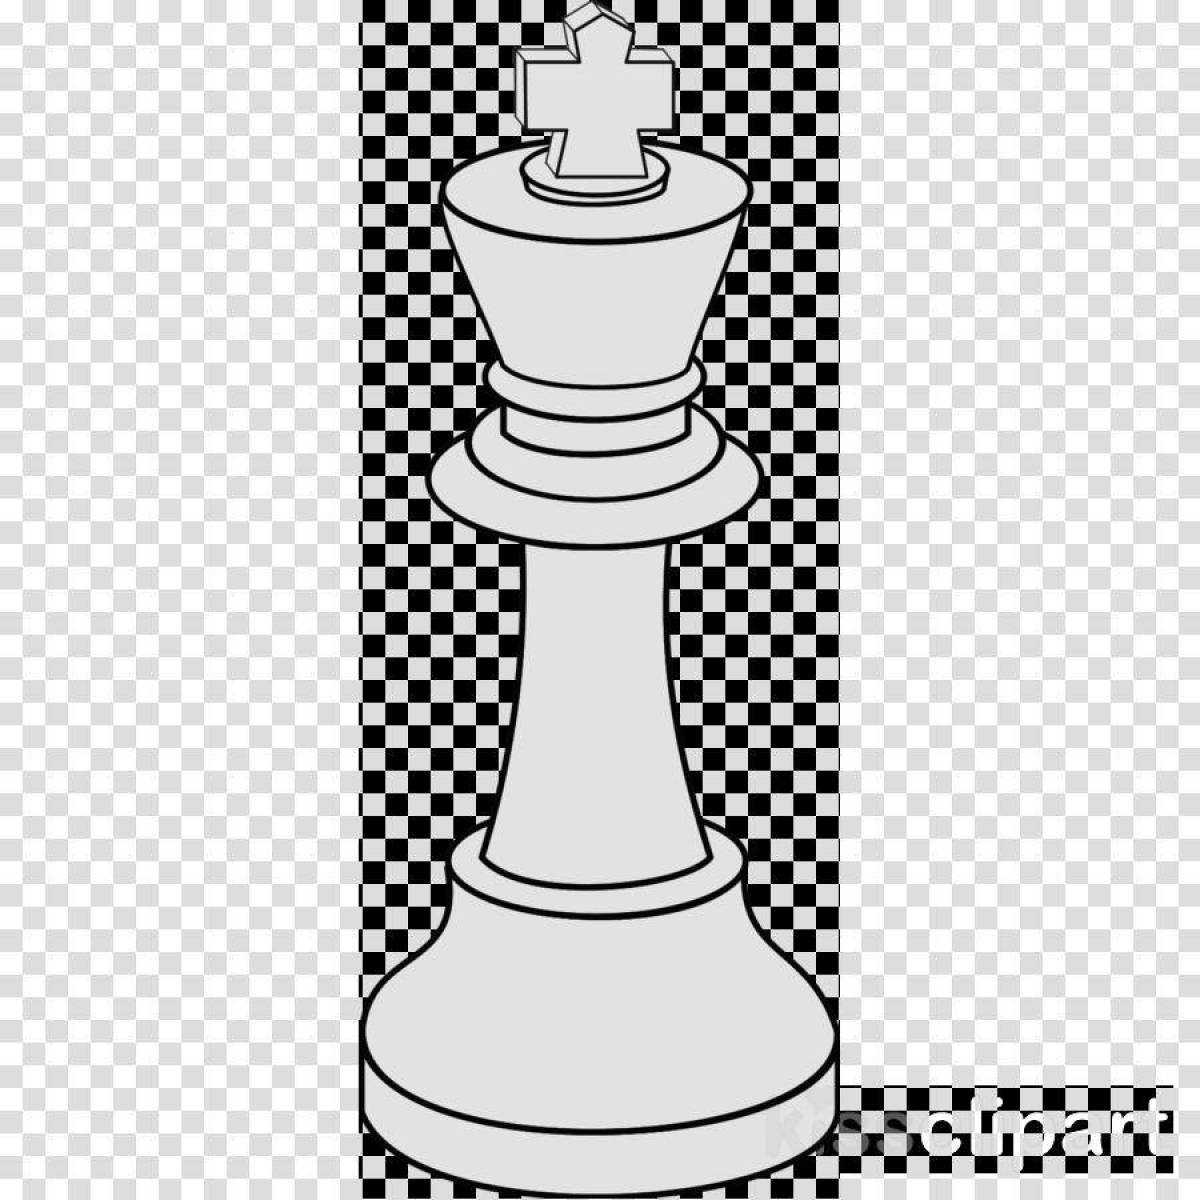 Colorful chess pieces coloring book for kids to explore